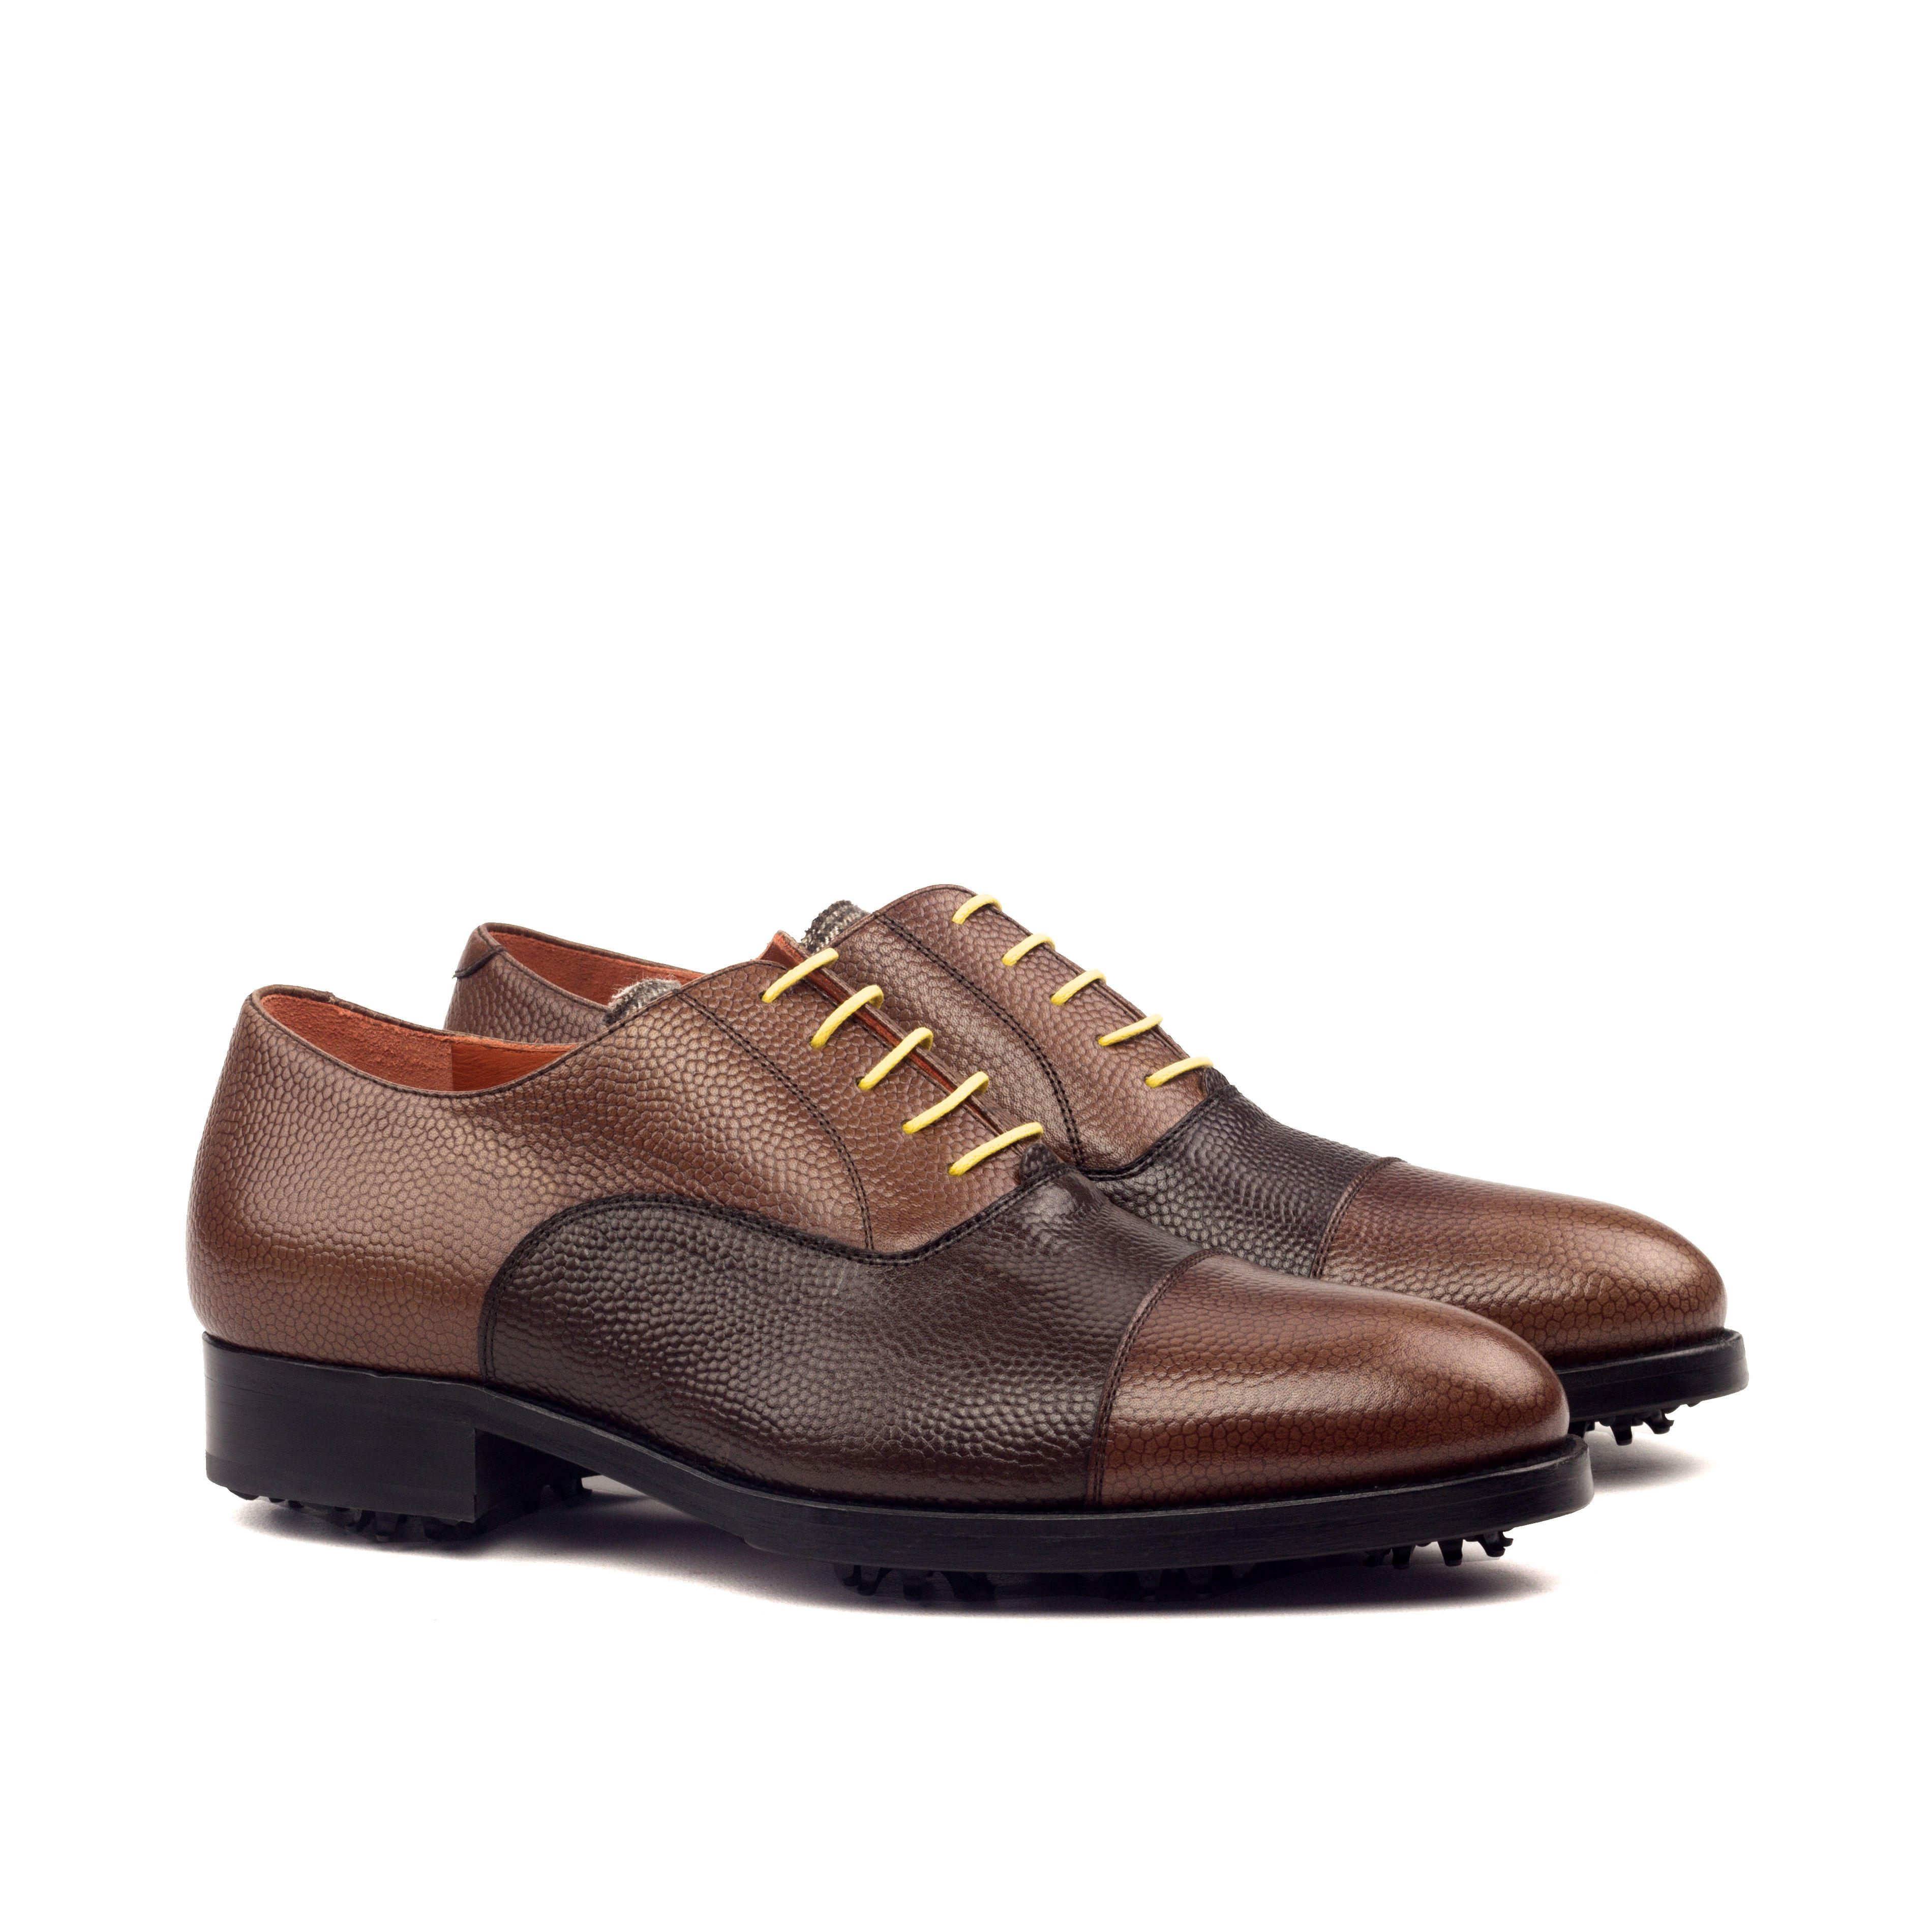 MANOR OF LONDON 'The Oxford' Two Tone Brown Pebble Grain Golfing Shoe Luxury Custom Initials Monogrammed Front Side View